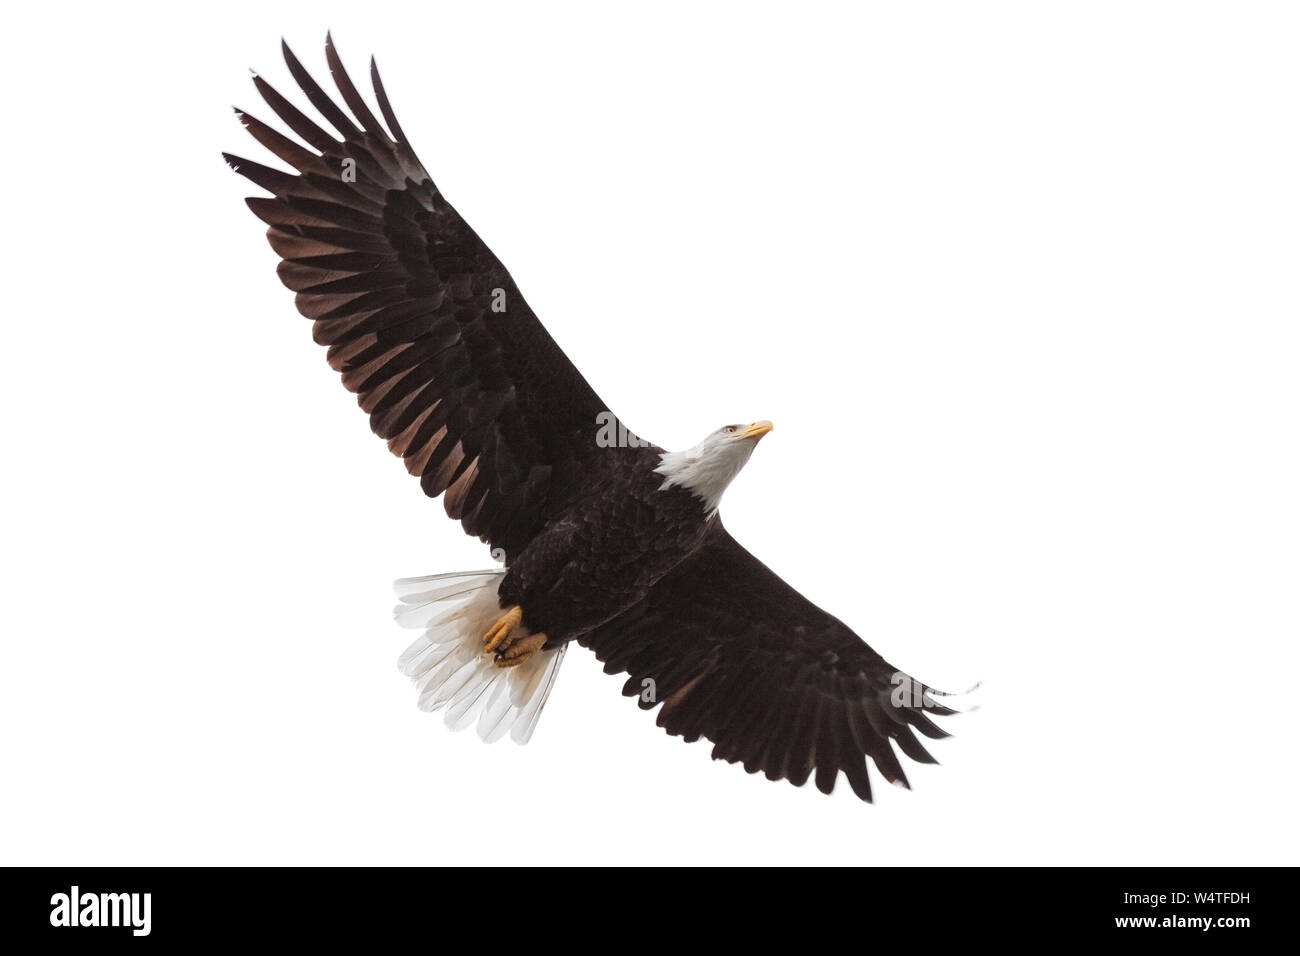 Wings spread wide open, a bald eagle drifts across a white background Stock Photo